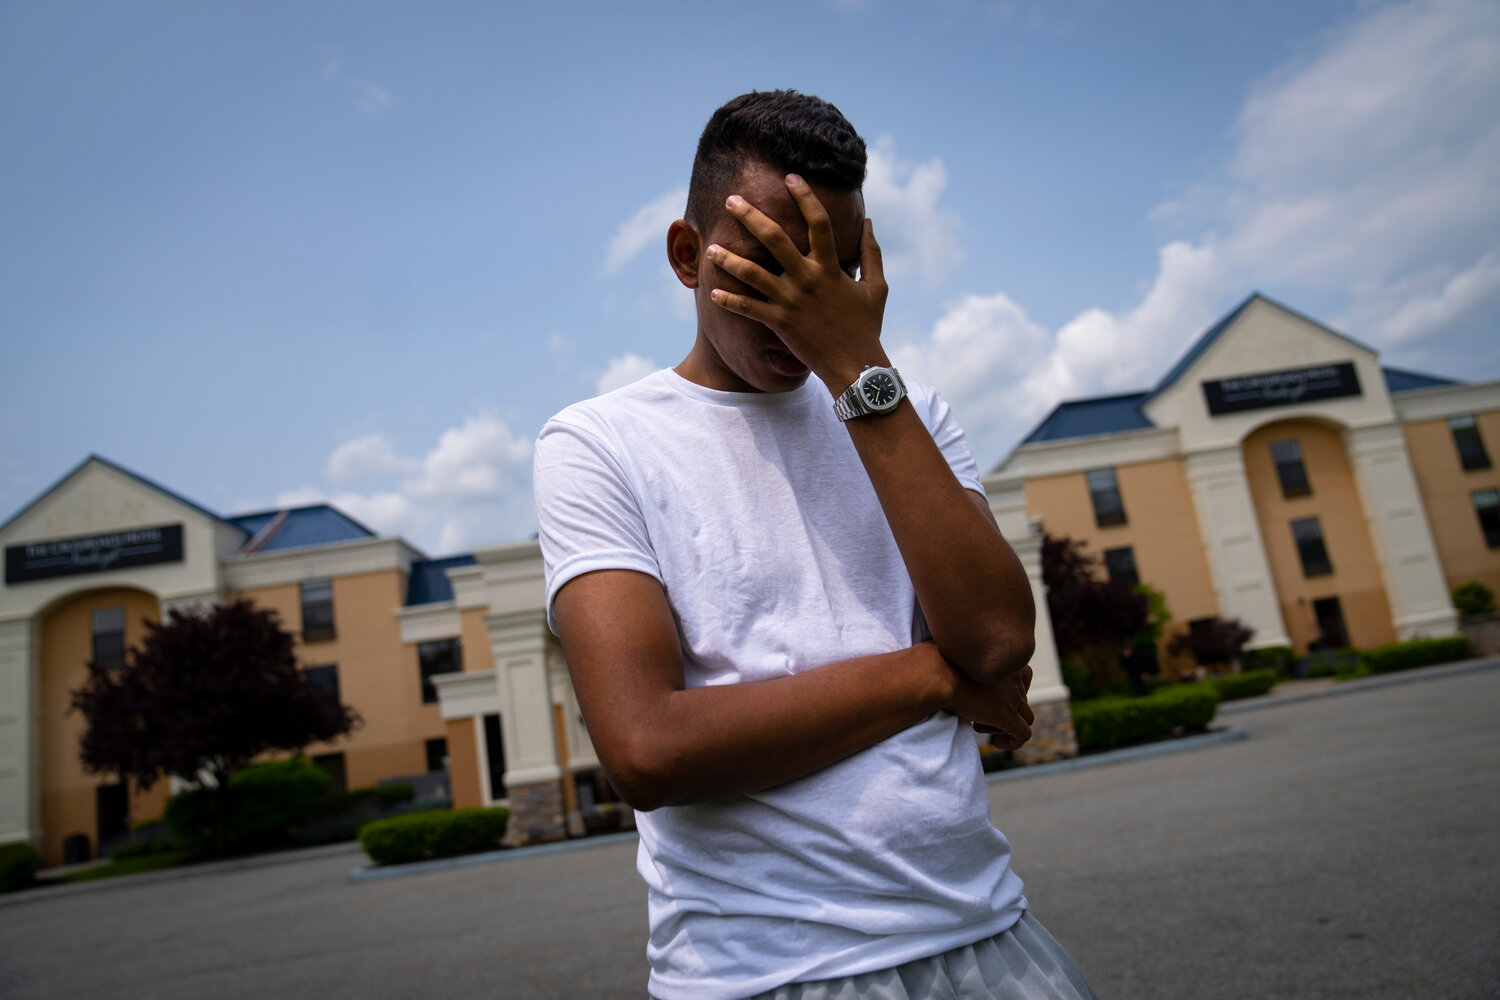 Mohamed, a 19-year-old fleeing political persecution in the northwest African country of Mauritania, poses for a photo that obscures his face to protect his identity, outside the Crossroads Hotel, before heading into town for a work opportunity, Monday, May 22, 2023, in Newburgh, N.Y.  Mohamed is one of about 400 international migrants the city has been putting up in a small number of hotels in other parts of the state this month to relieve pressure on its overtaxed homeless shelter system.